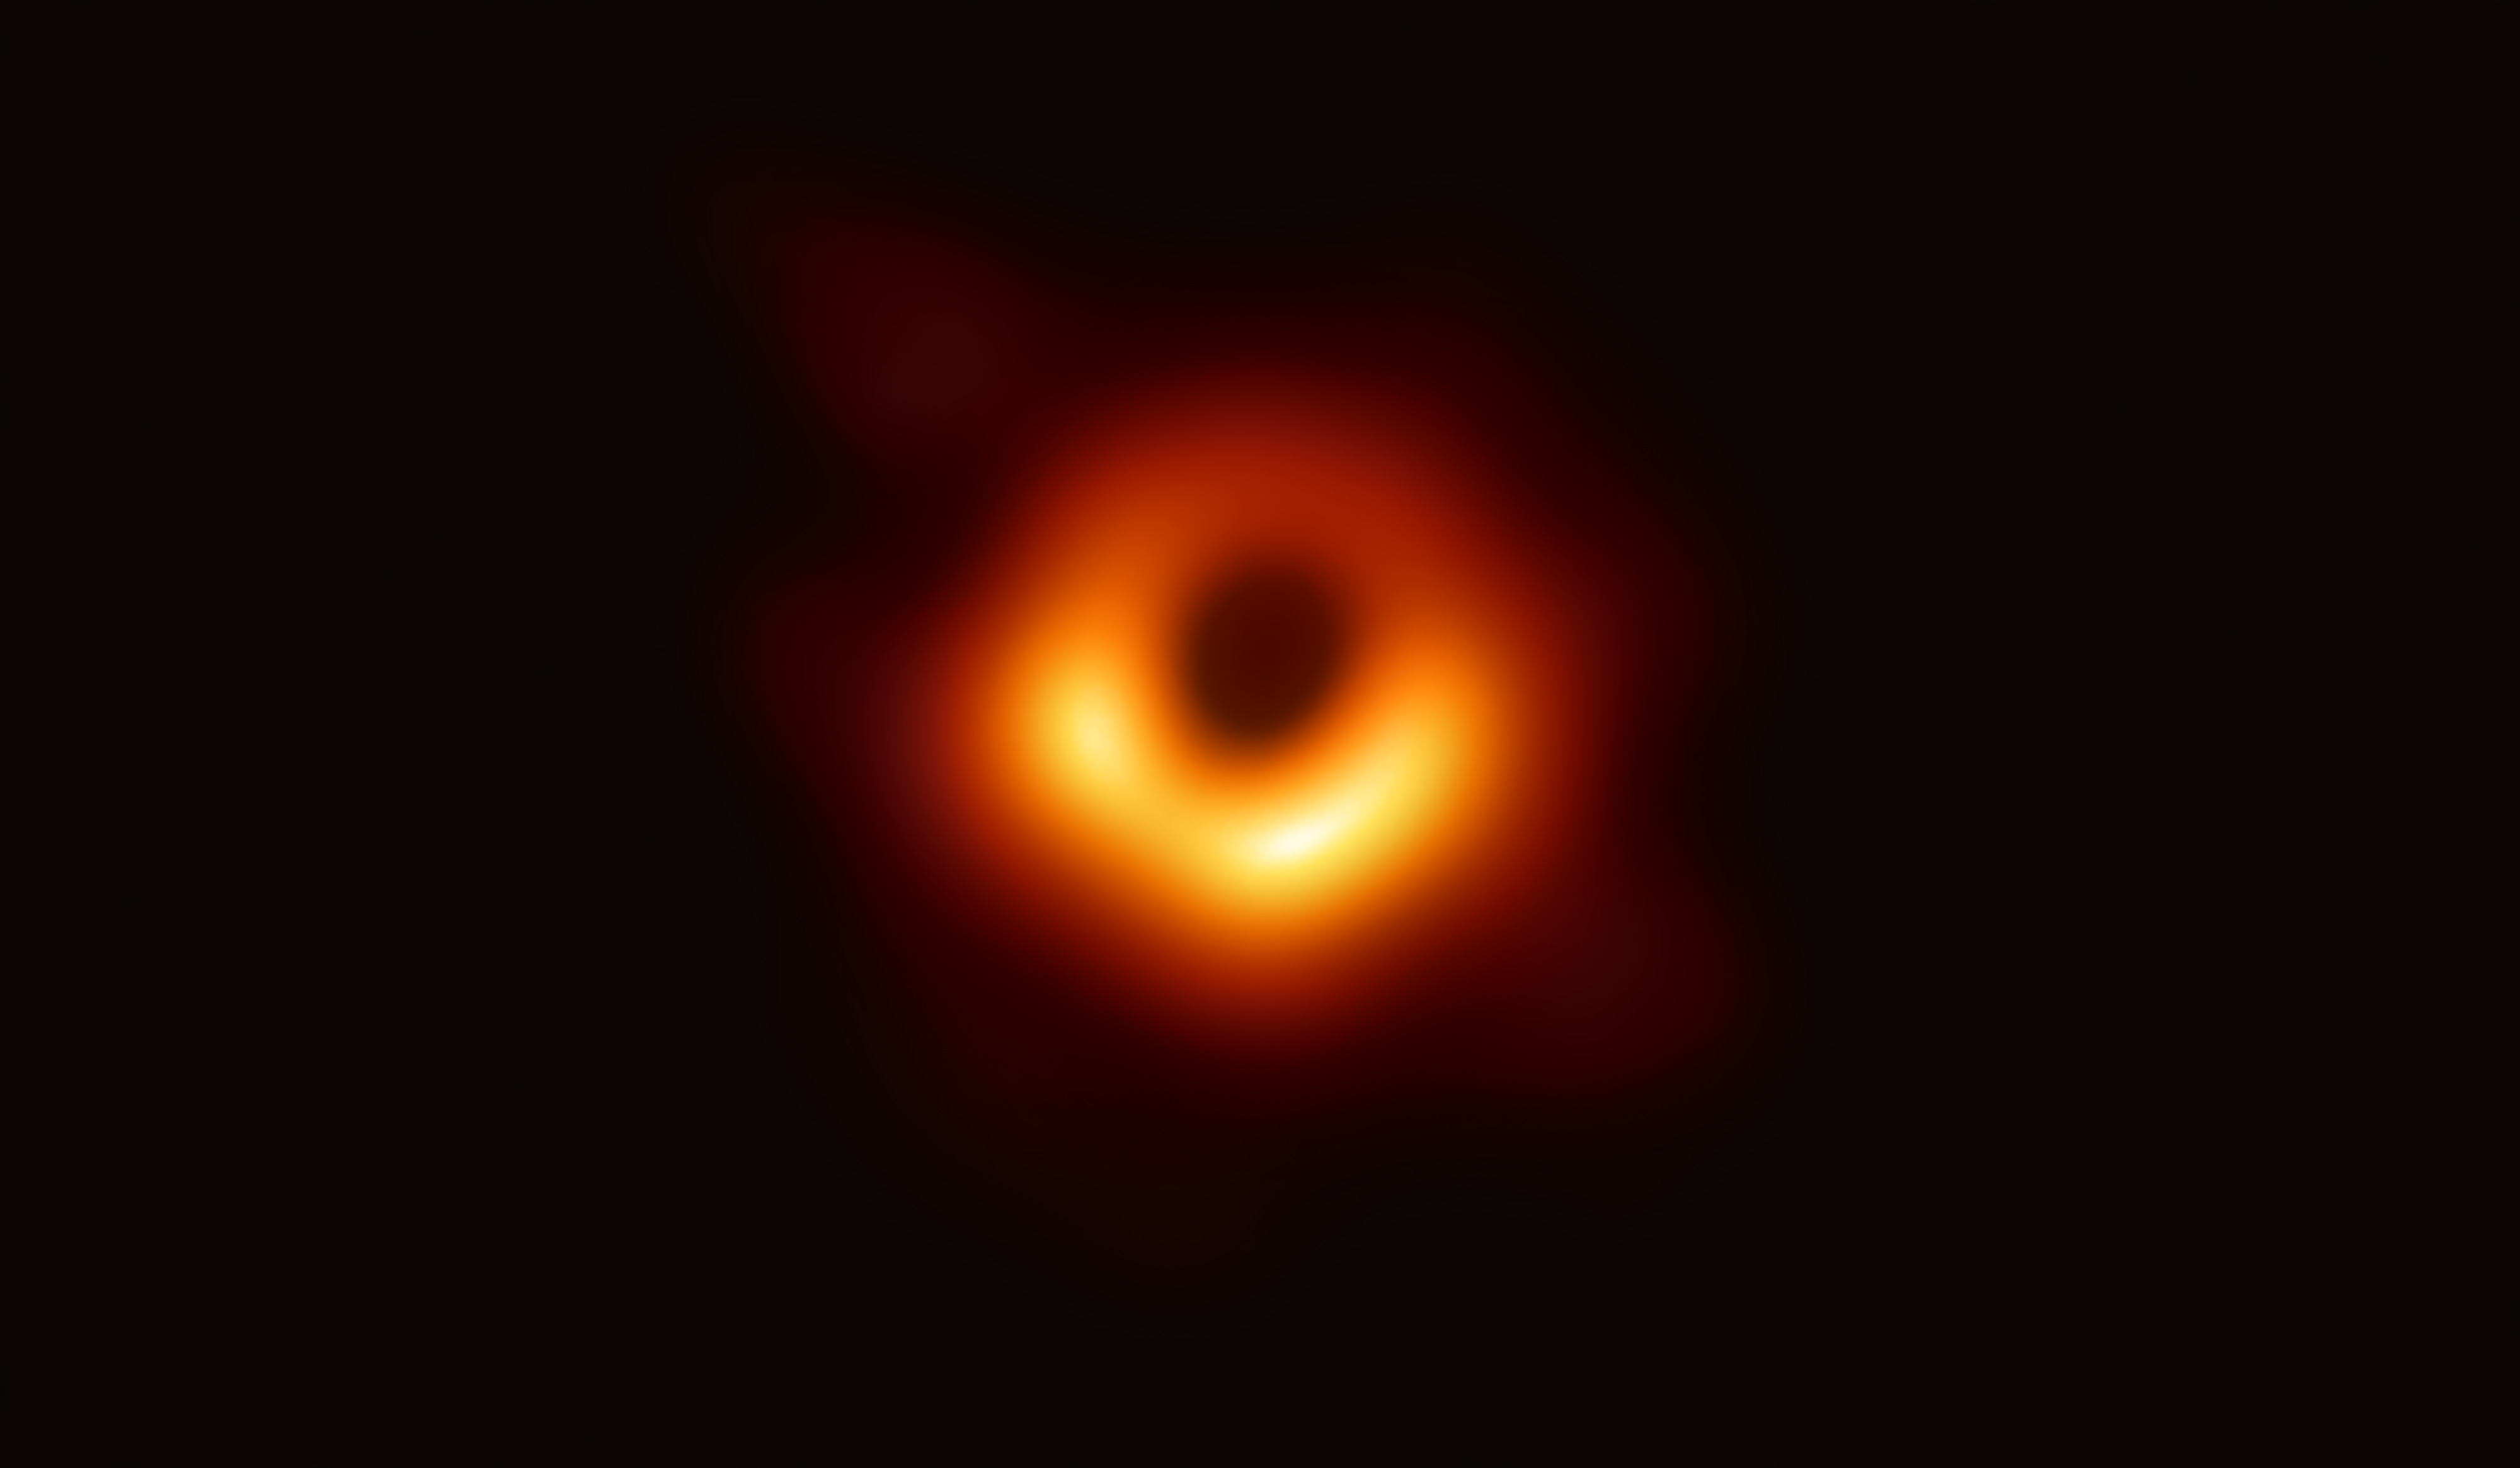 10 First image of shadow of black hole event horizon sphere